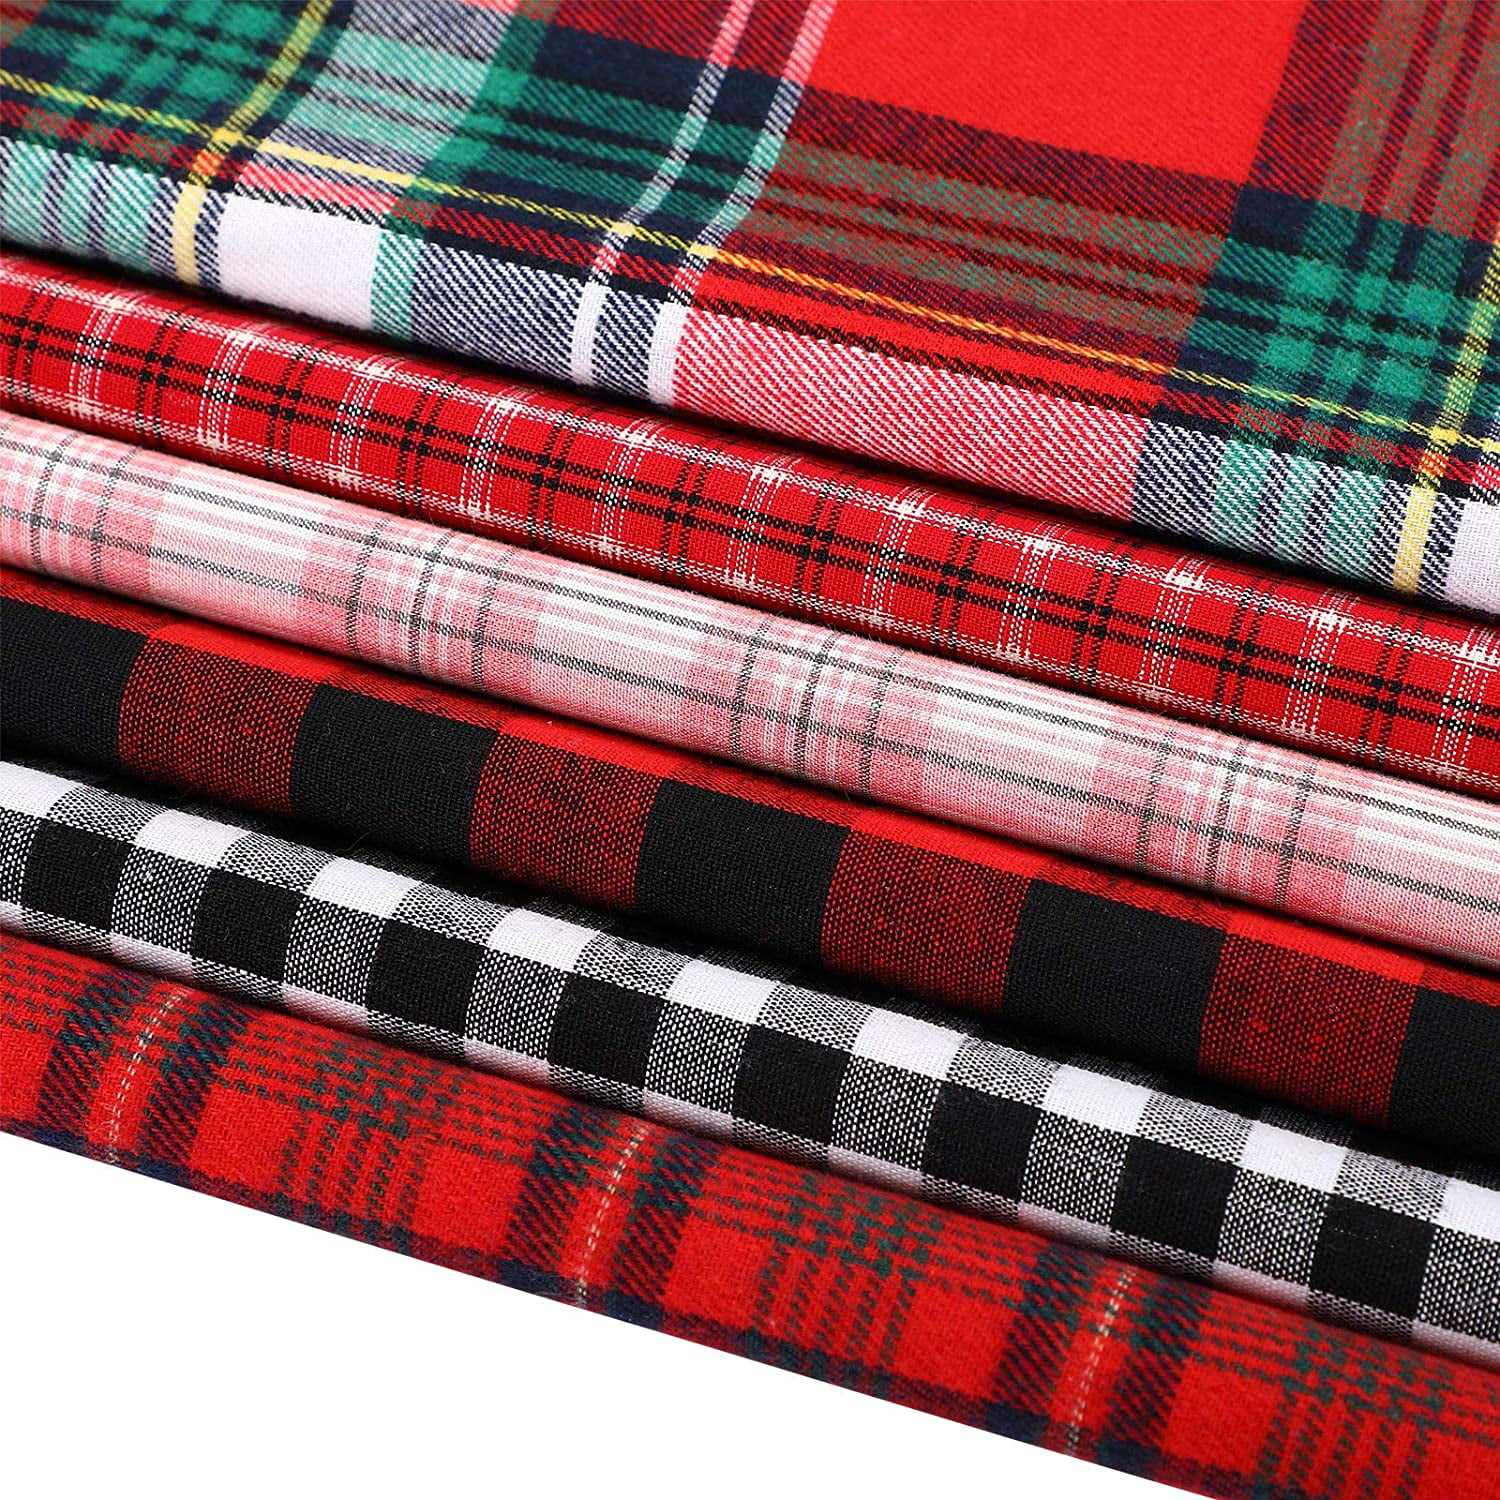 12 Pieces Plaid Fabric Squares Bundles Buffalo Stripe Fat Quarters 19.5 x 15.7 Inch Charm Yarn-Dyed Checked Cloth Quilting Fabric Scraps for Christmas DIY Crafting Sewing Patchwork 